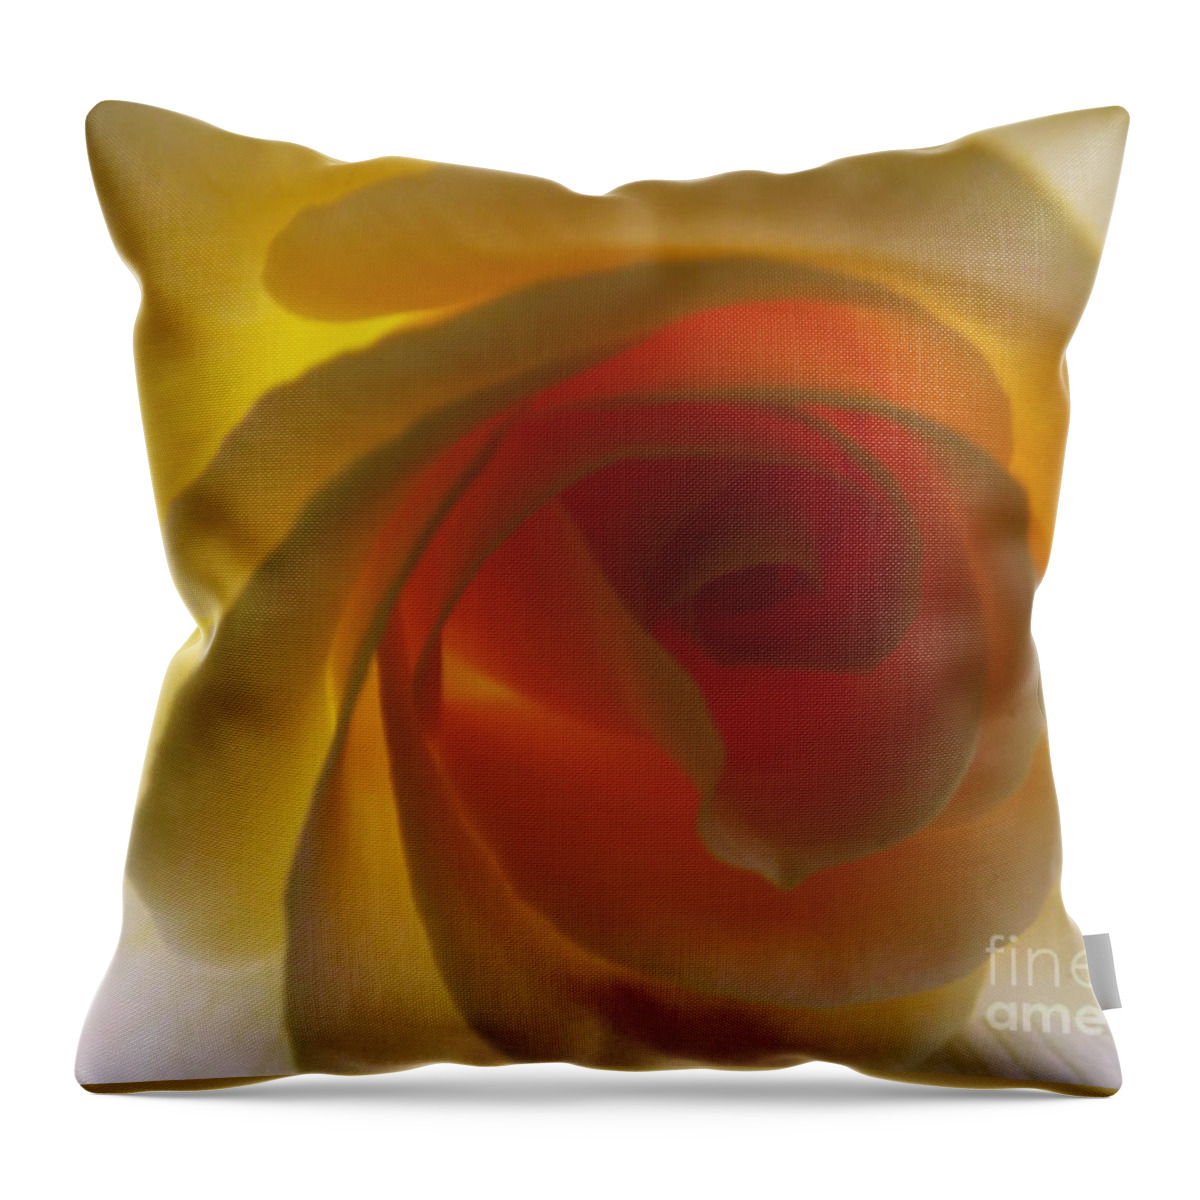 Yellow Throw Pillow featuring the photograph Unaltered Rose by Robyn King